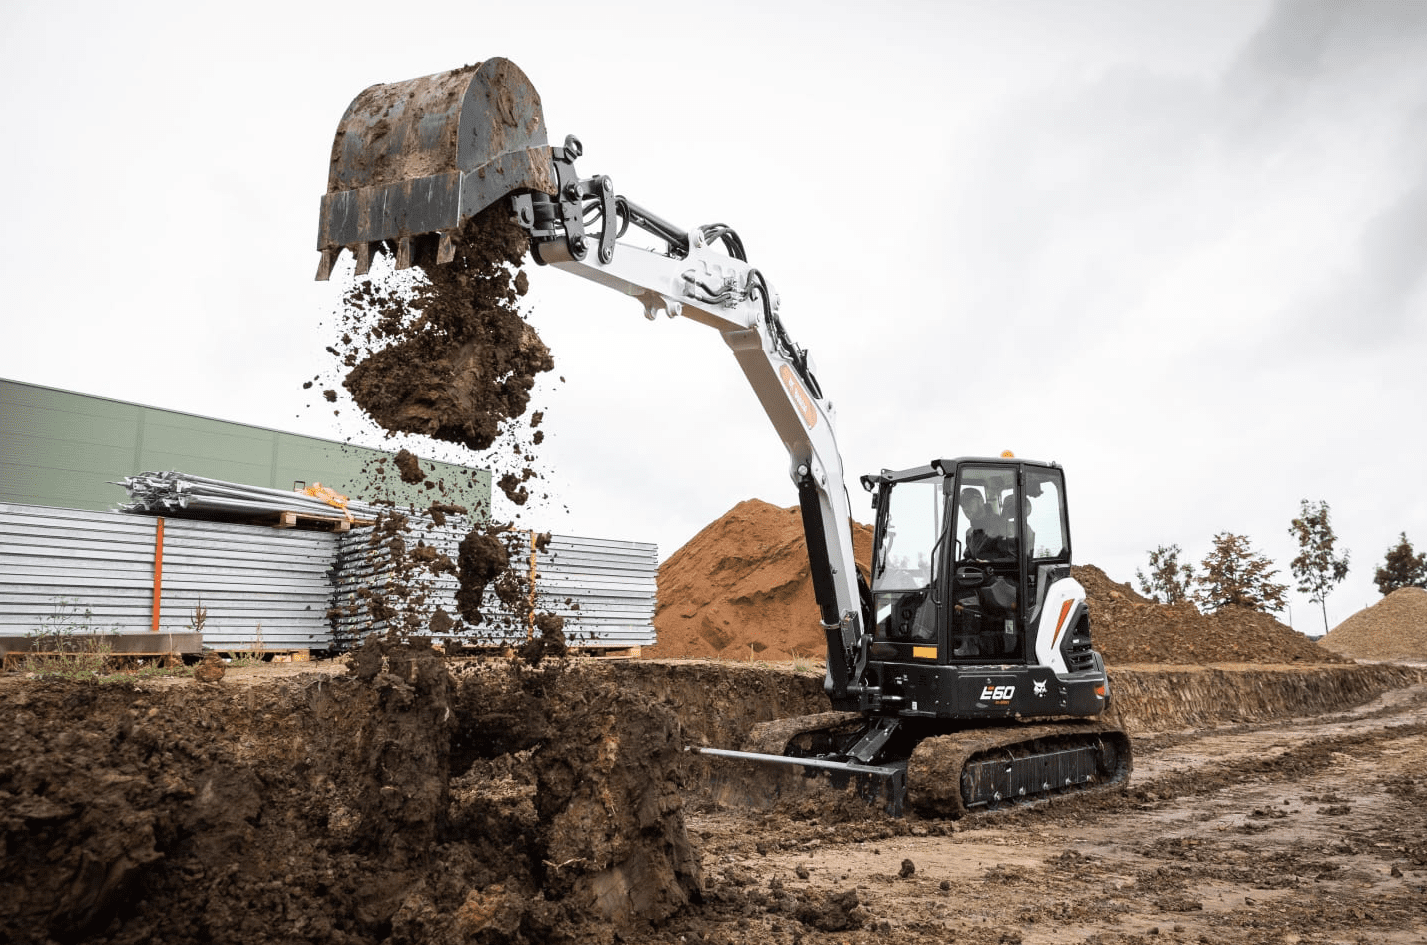 Browse Specs and more for the Bobcat E60 Compact Excavator - Bobcat of North Texas